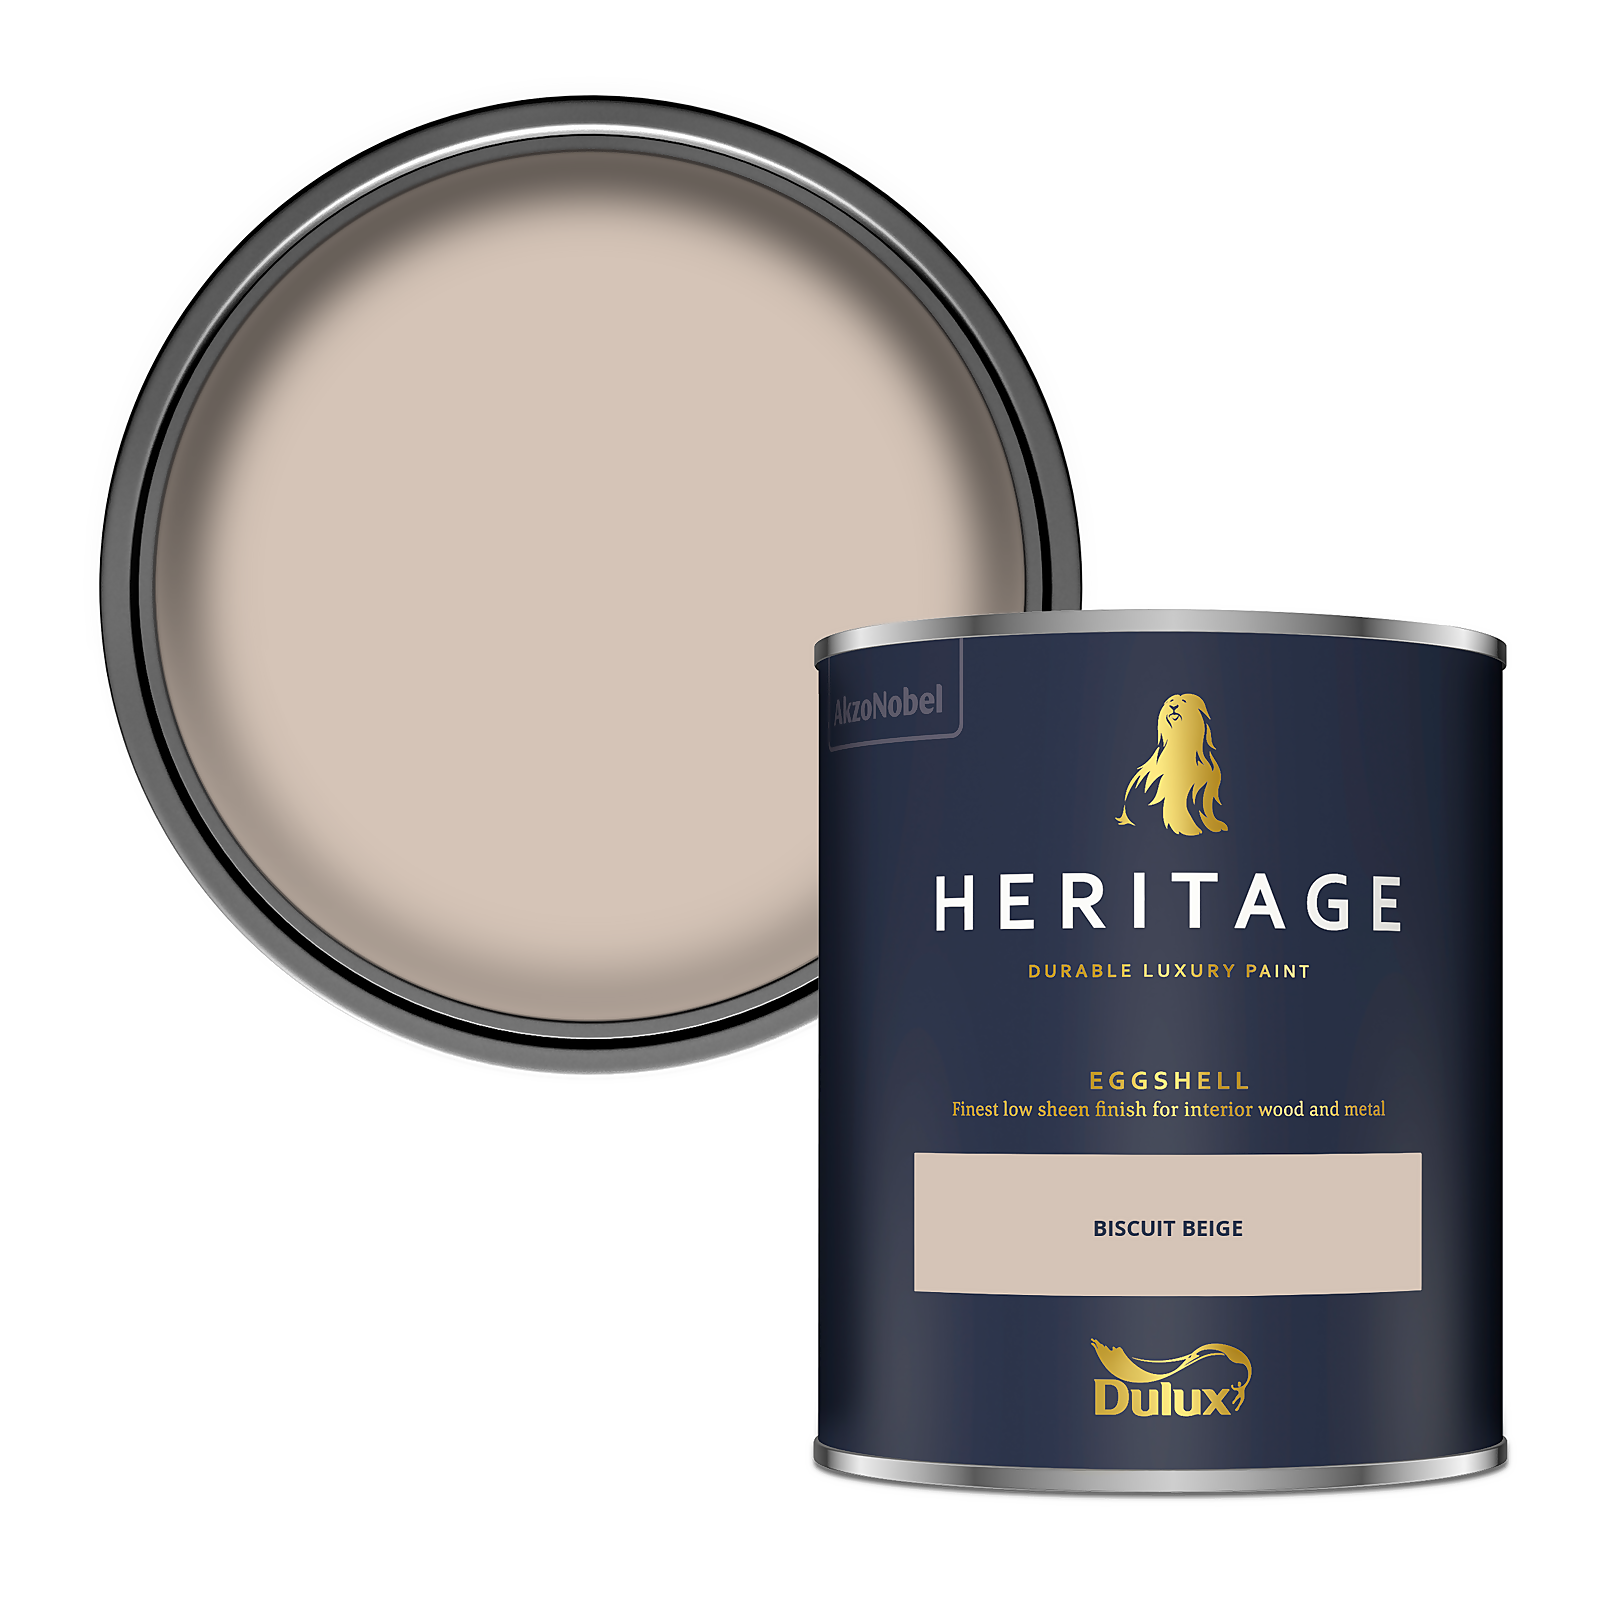 Photo of Dulux Heritage Eggshell Paint - Biscuit Beige - 750ml